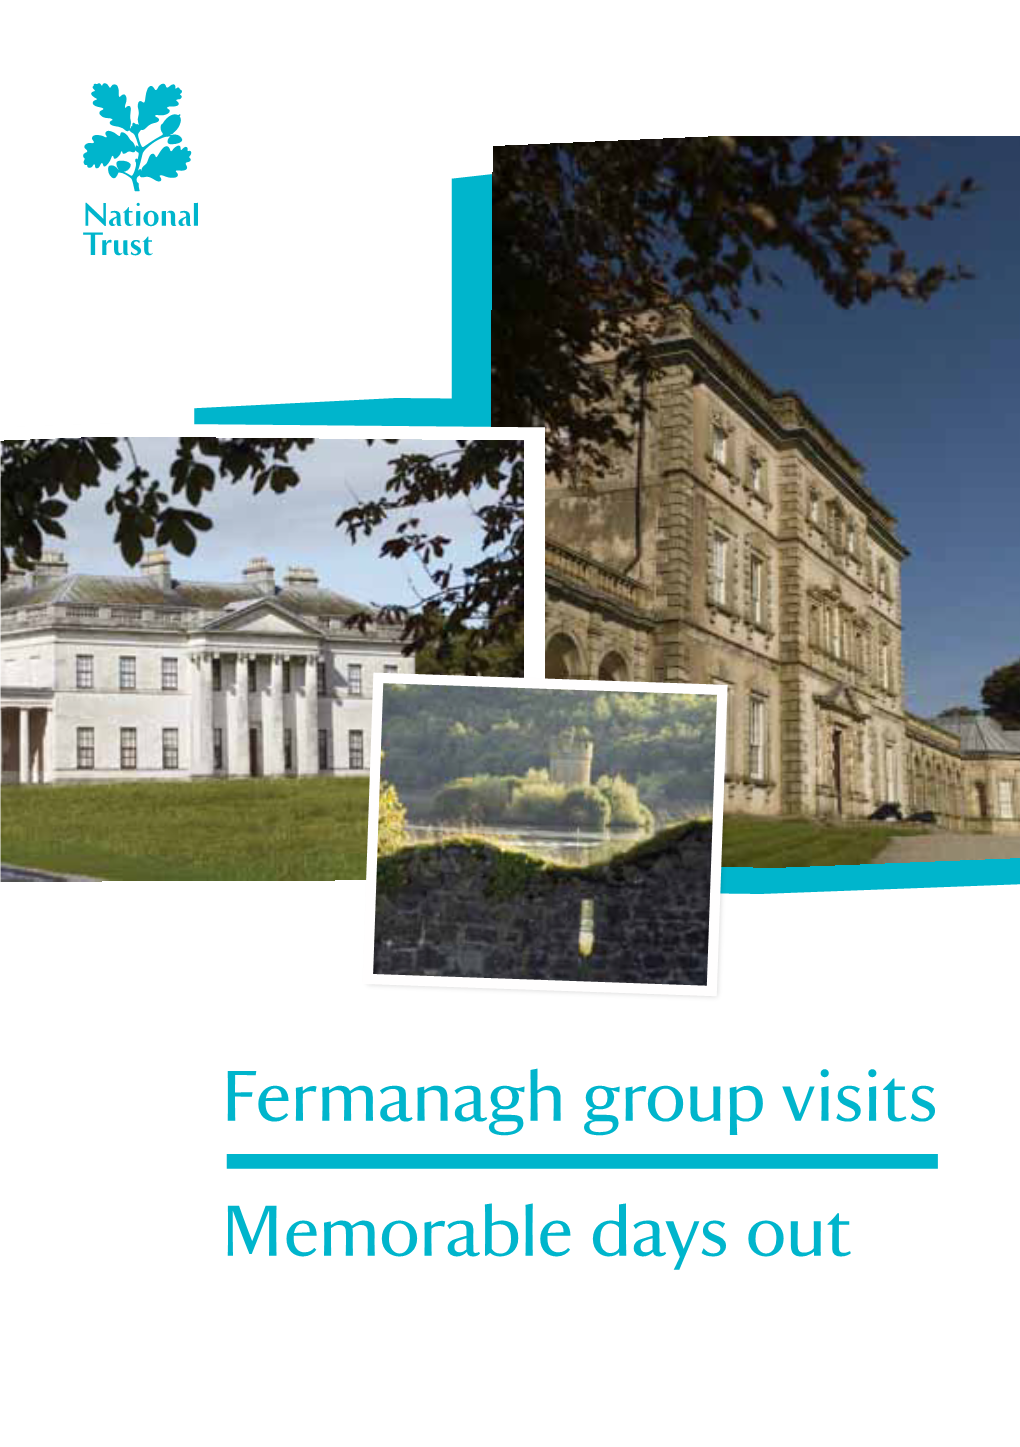 Fermanagh Group Visits Memorable Days